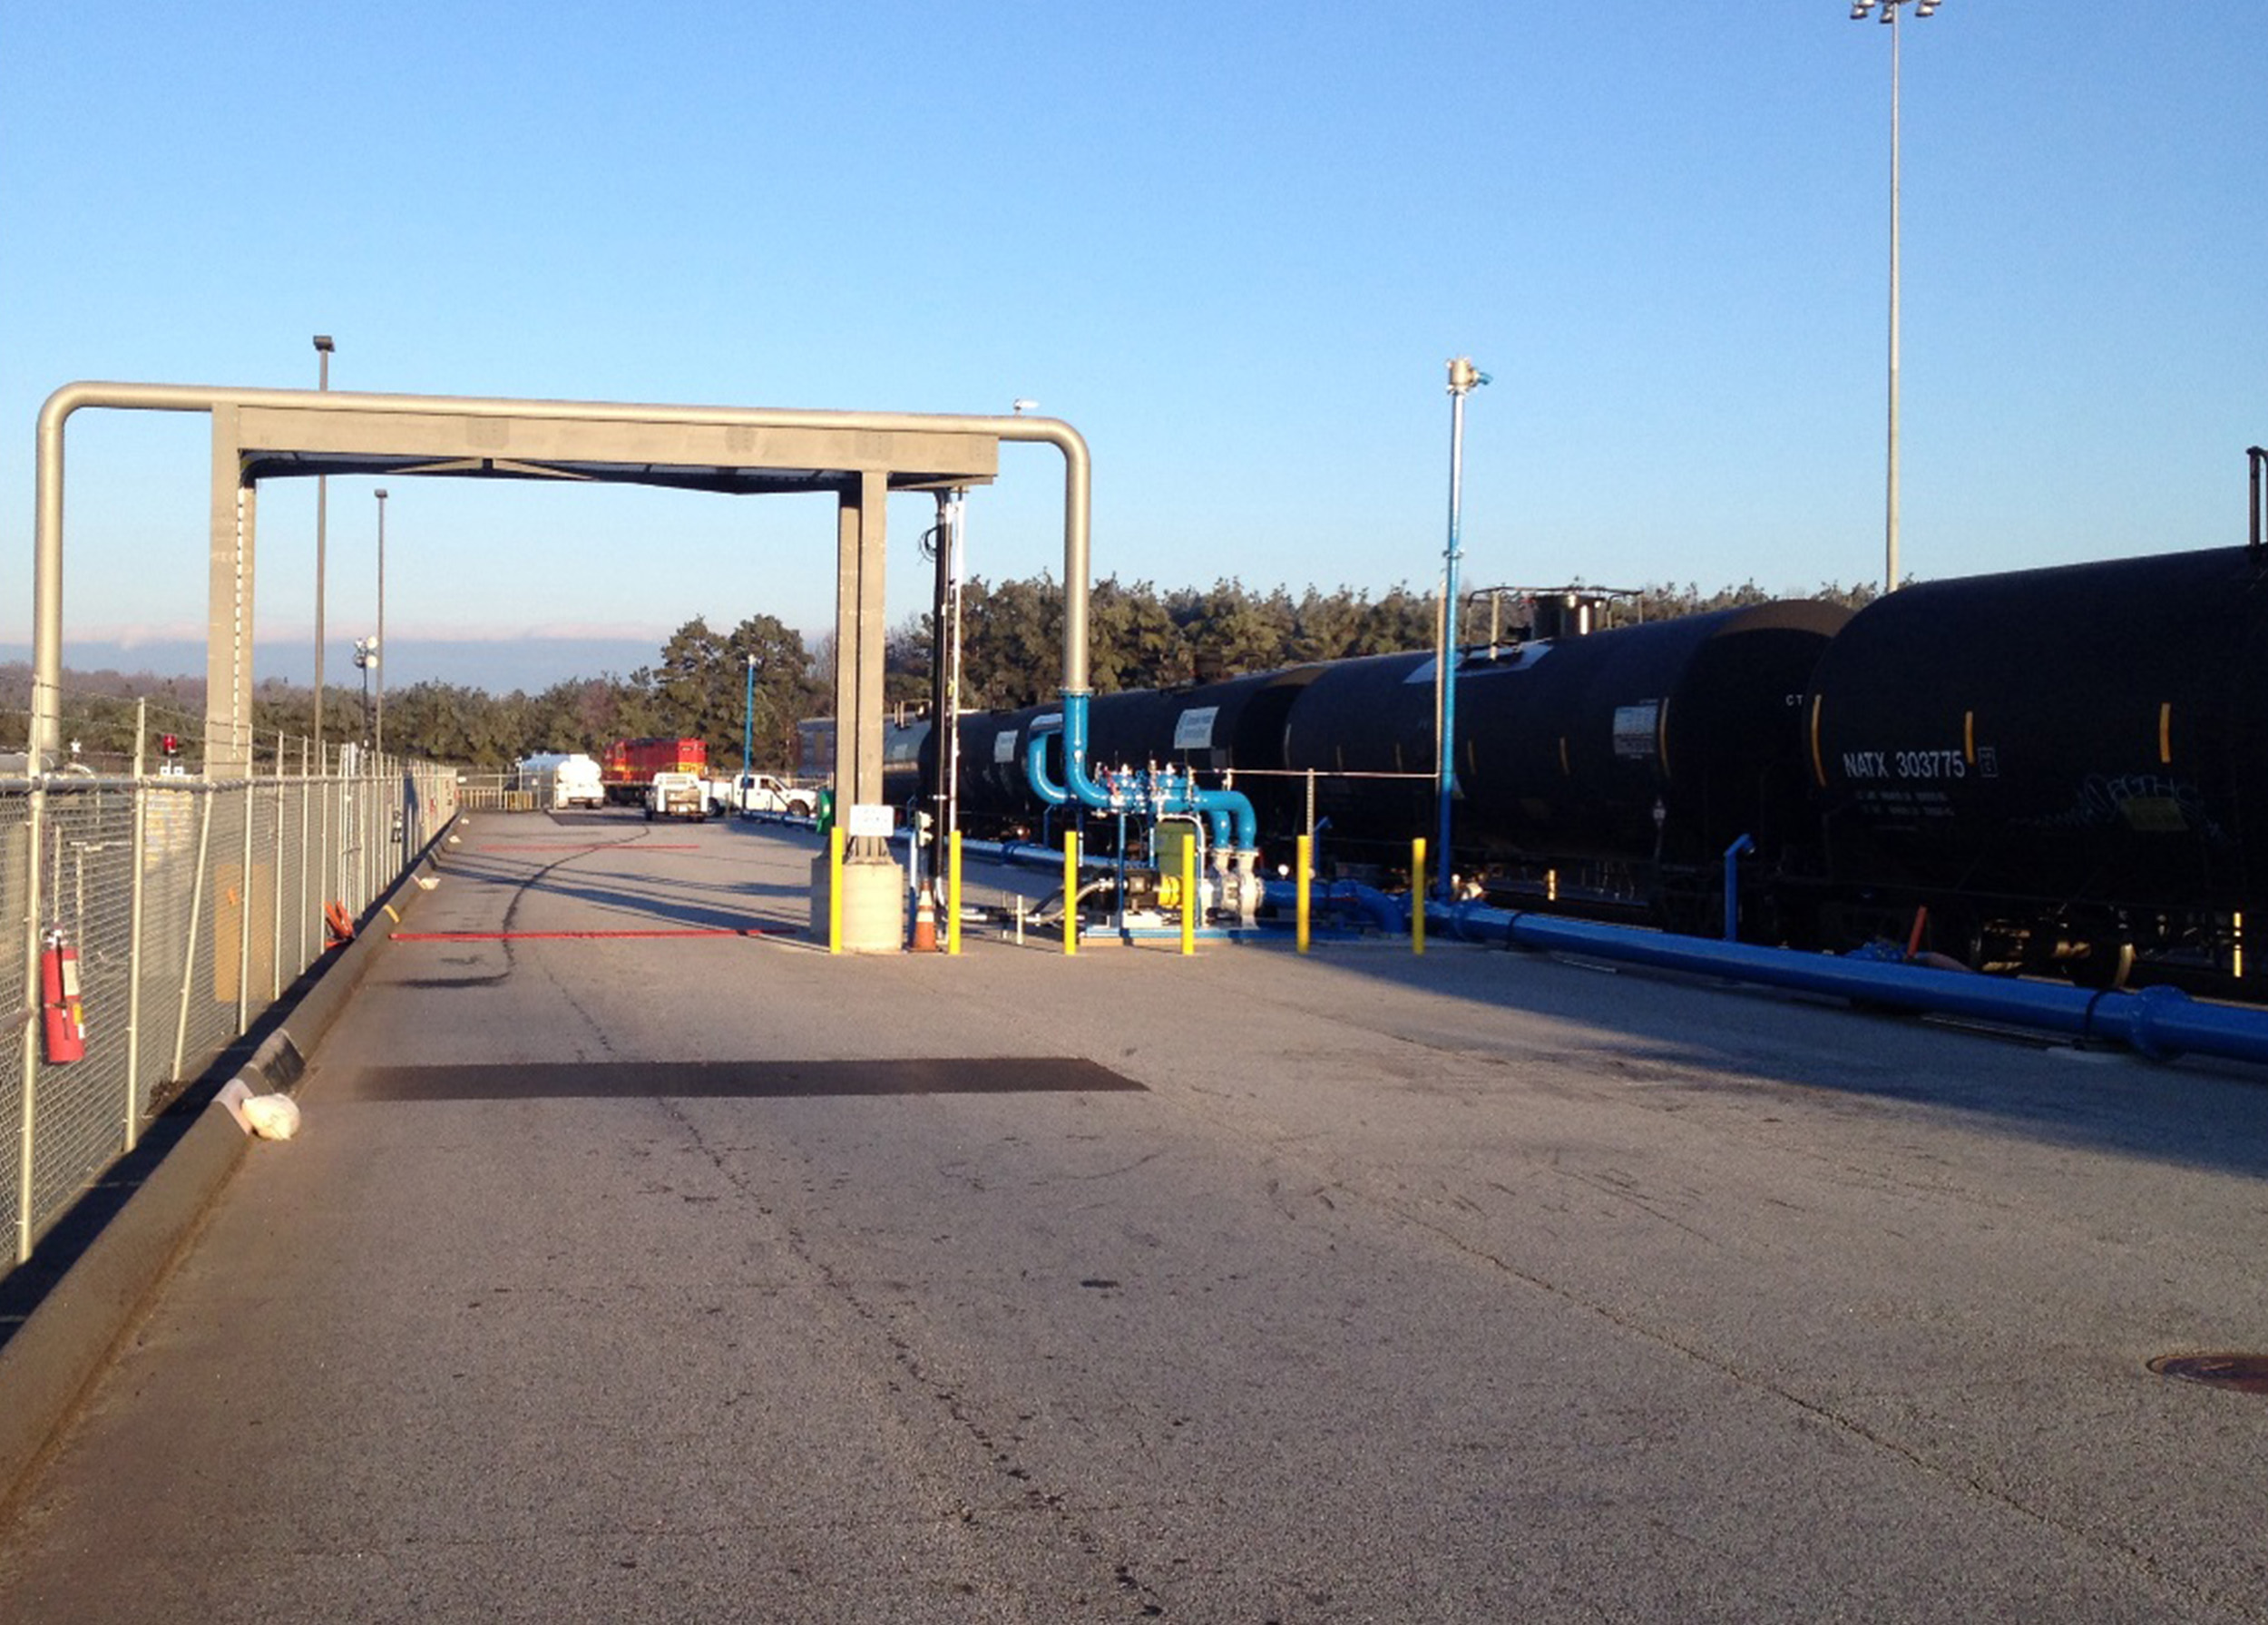 This facility consists of a 20-railcar unloading track that unloads 10 railcars at a time.